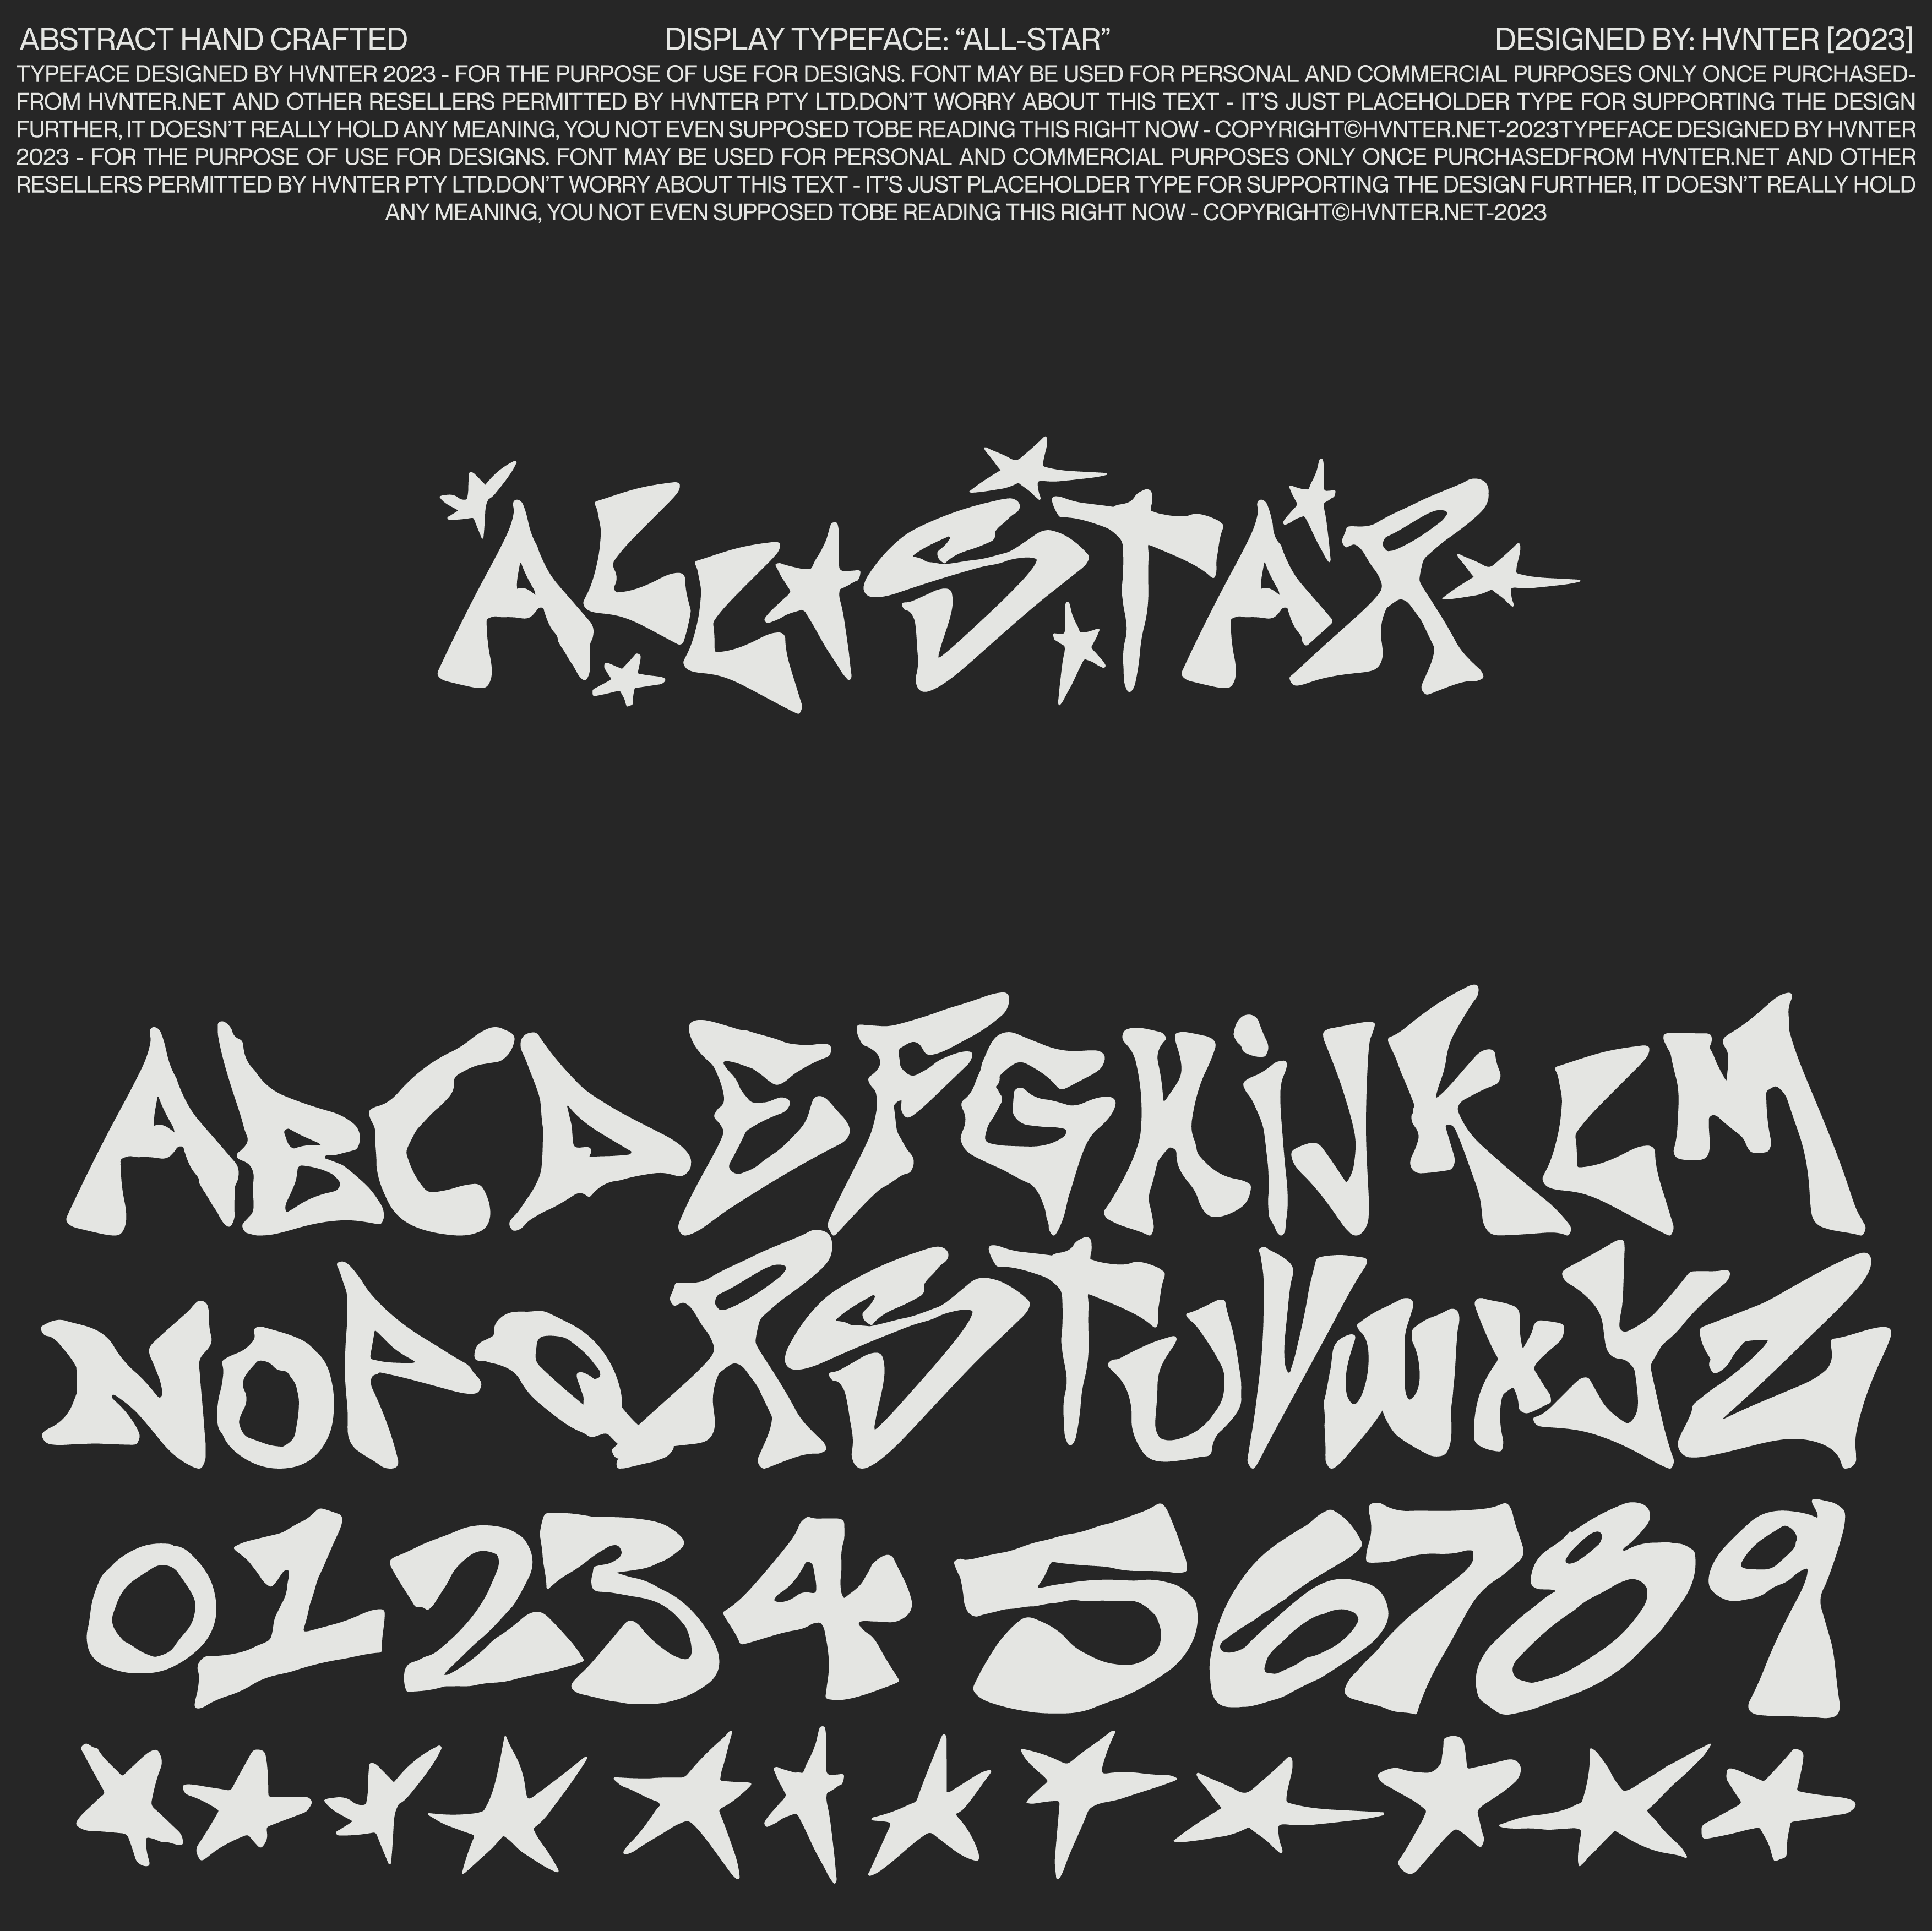 All-Star Typeface